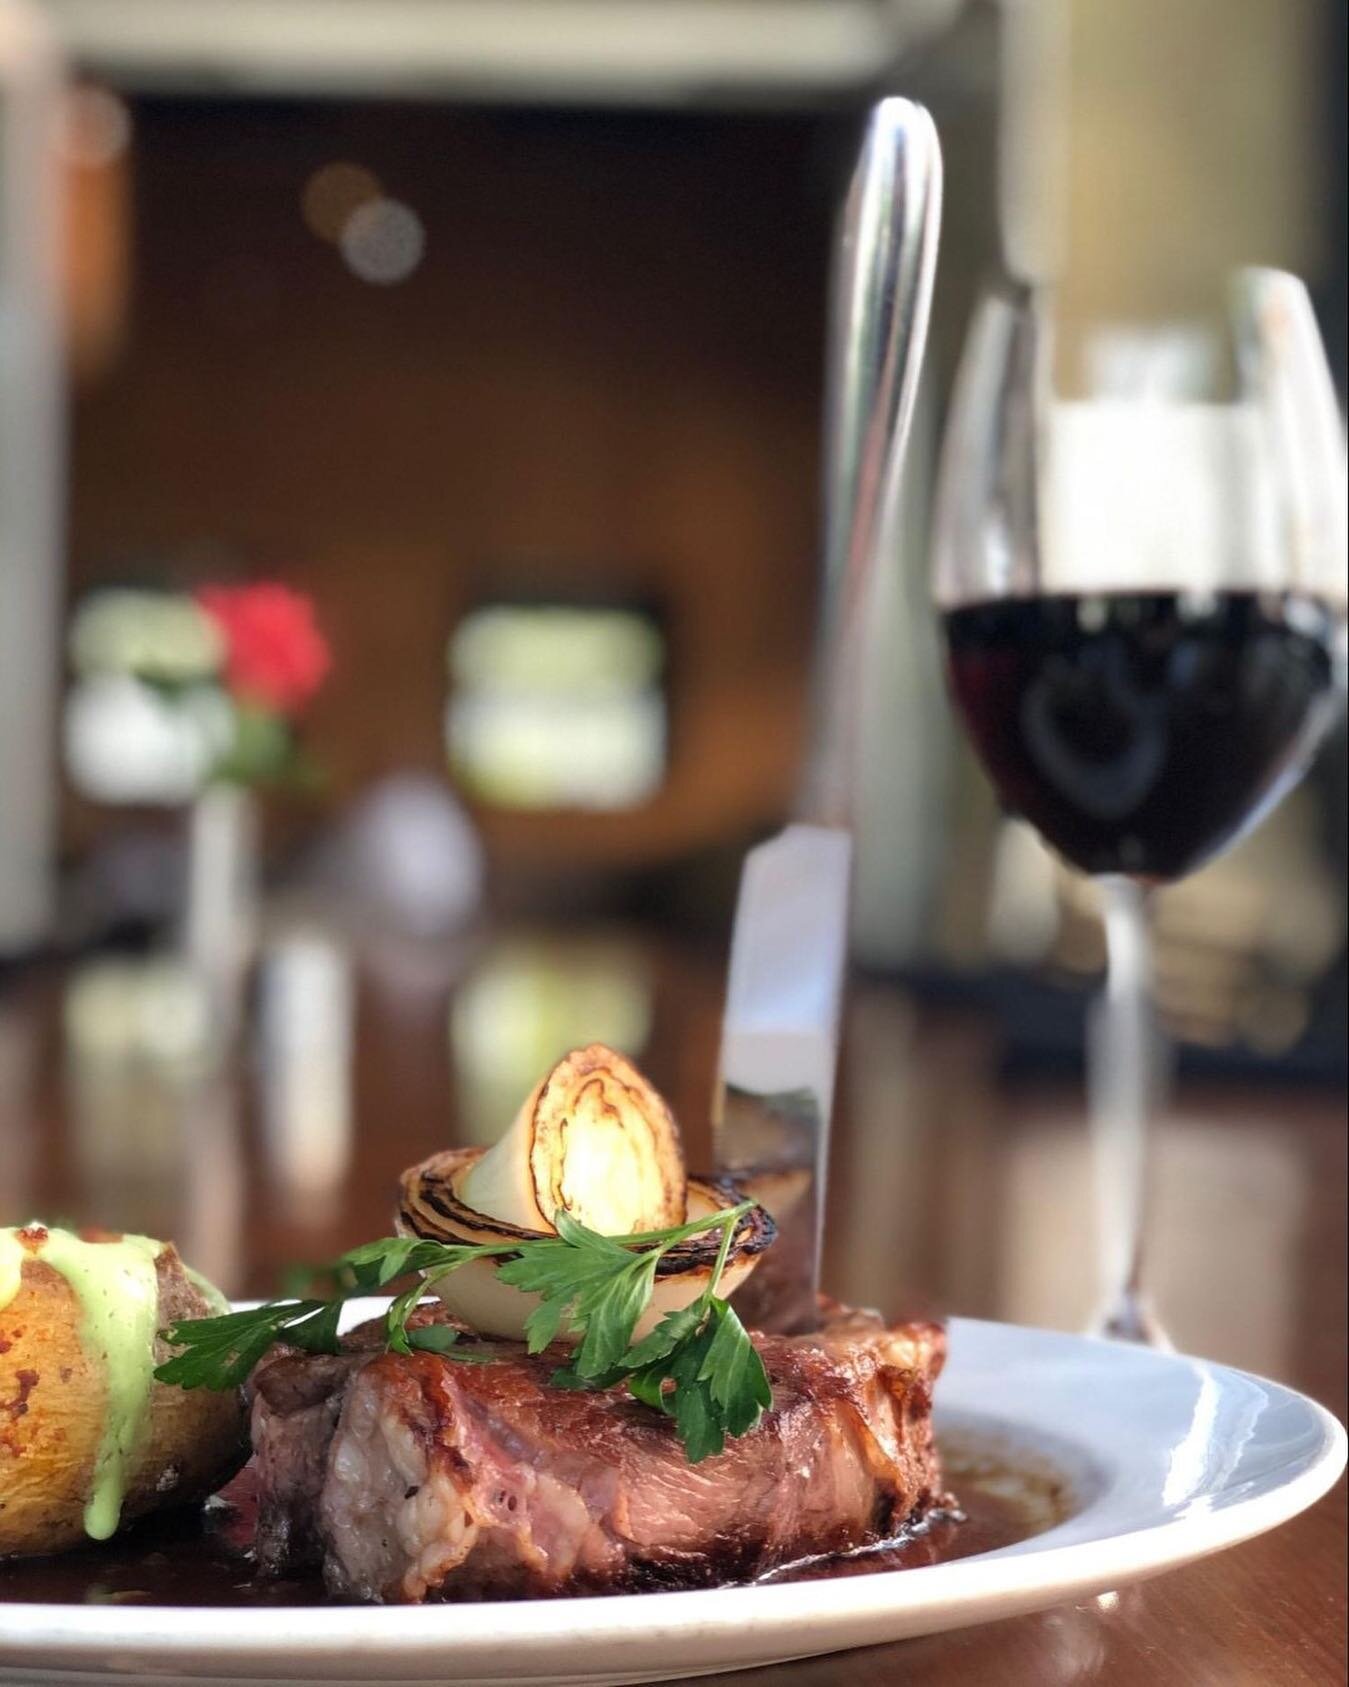 Flavorful, juicy, and cooked to perfection. Our Prime Rib Special makes every Thursday a treat. 

12 oz. Prime Rib and a Loaded Baked Potato | $28